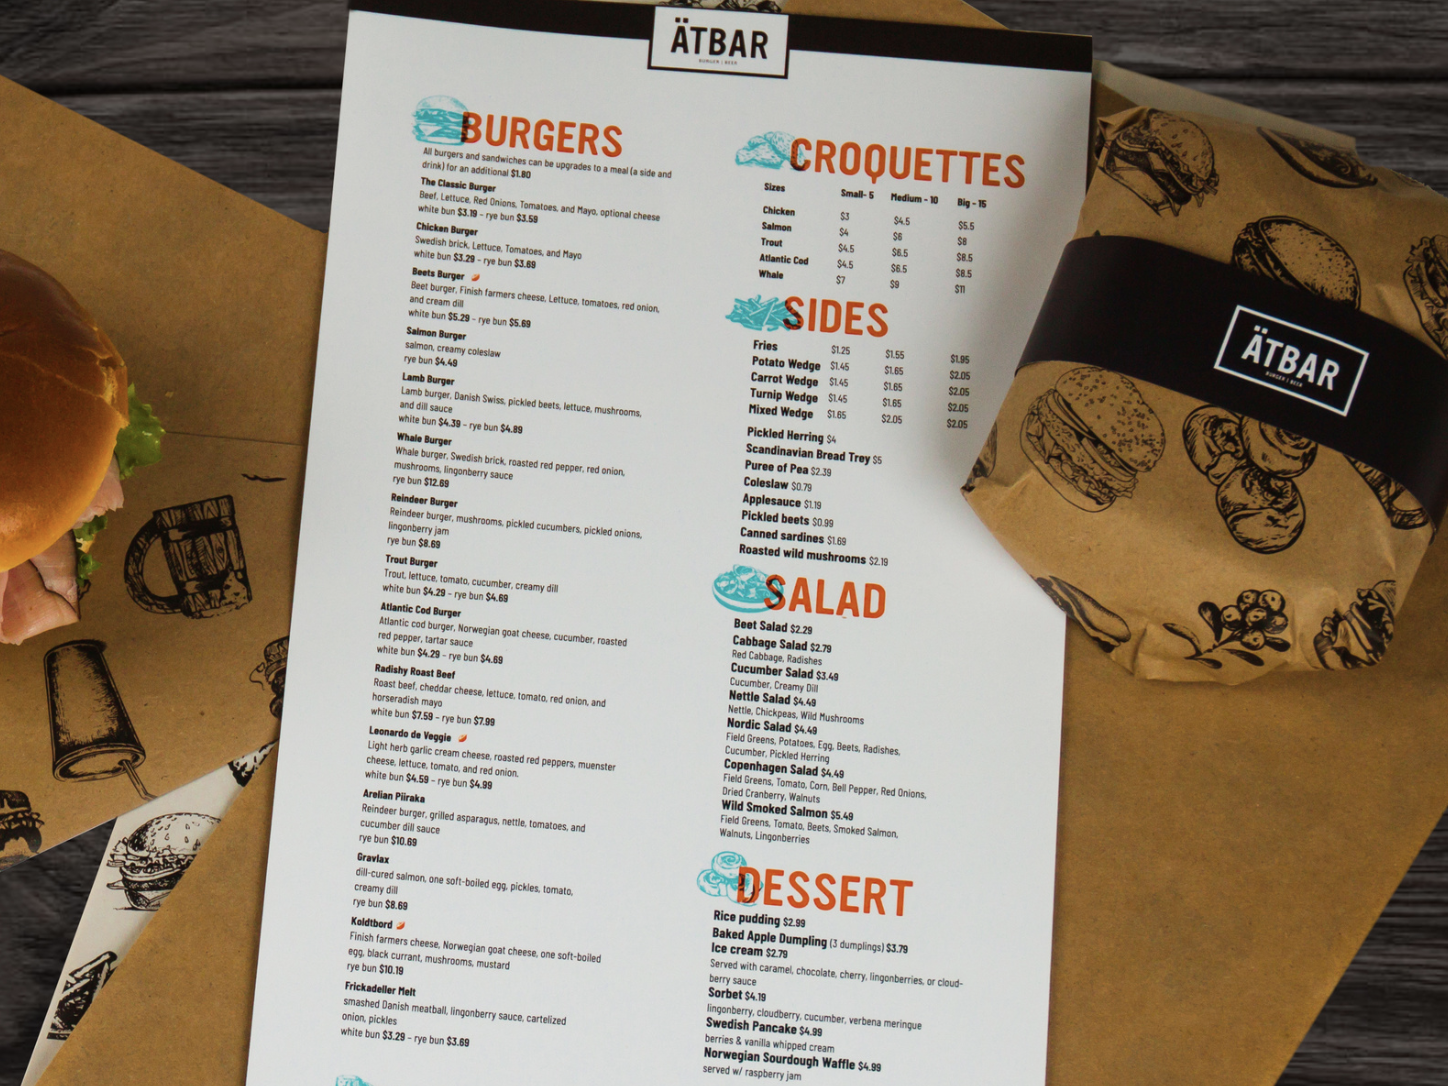 Download Mockup Menu and Food Packaging by Andrew Kroll on Dribbble